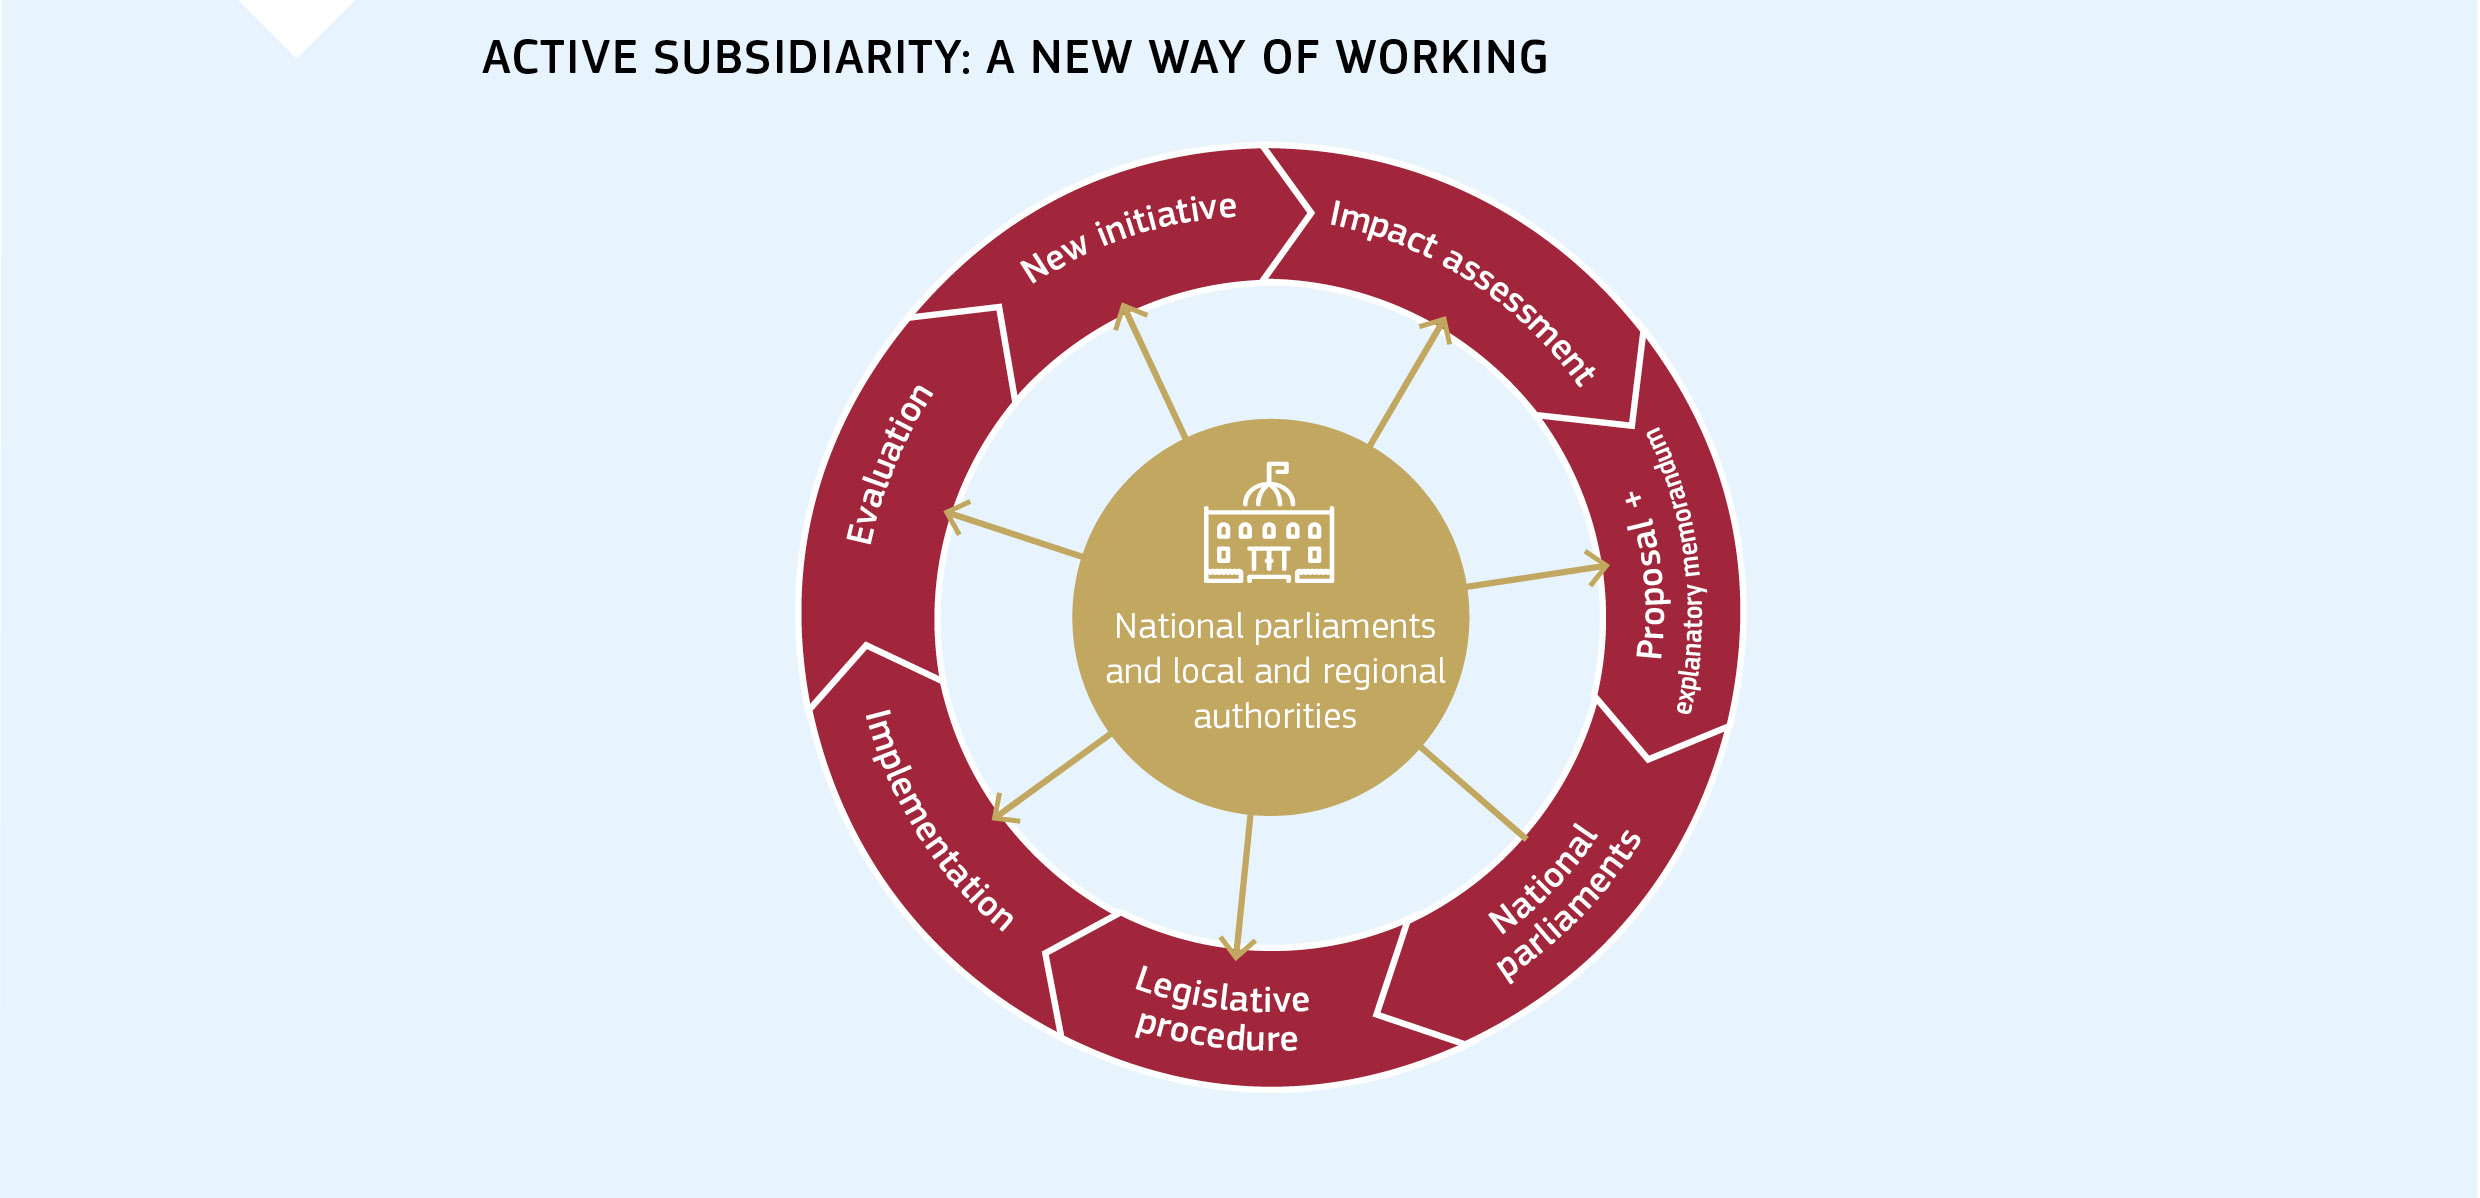 ACTIVE SUBSIDIARITY: A NEW WAY OF WORKING